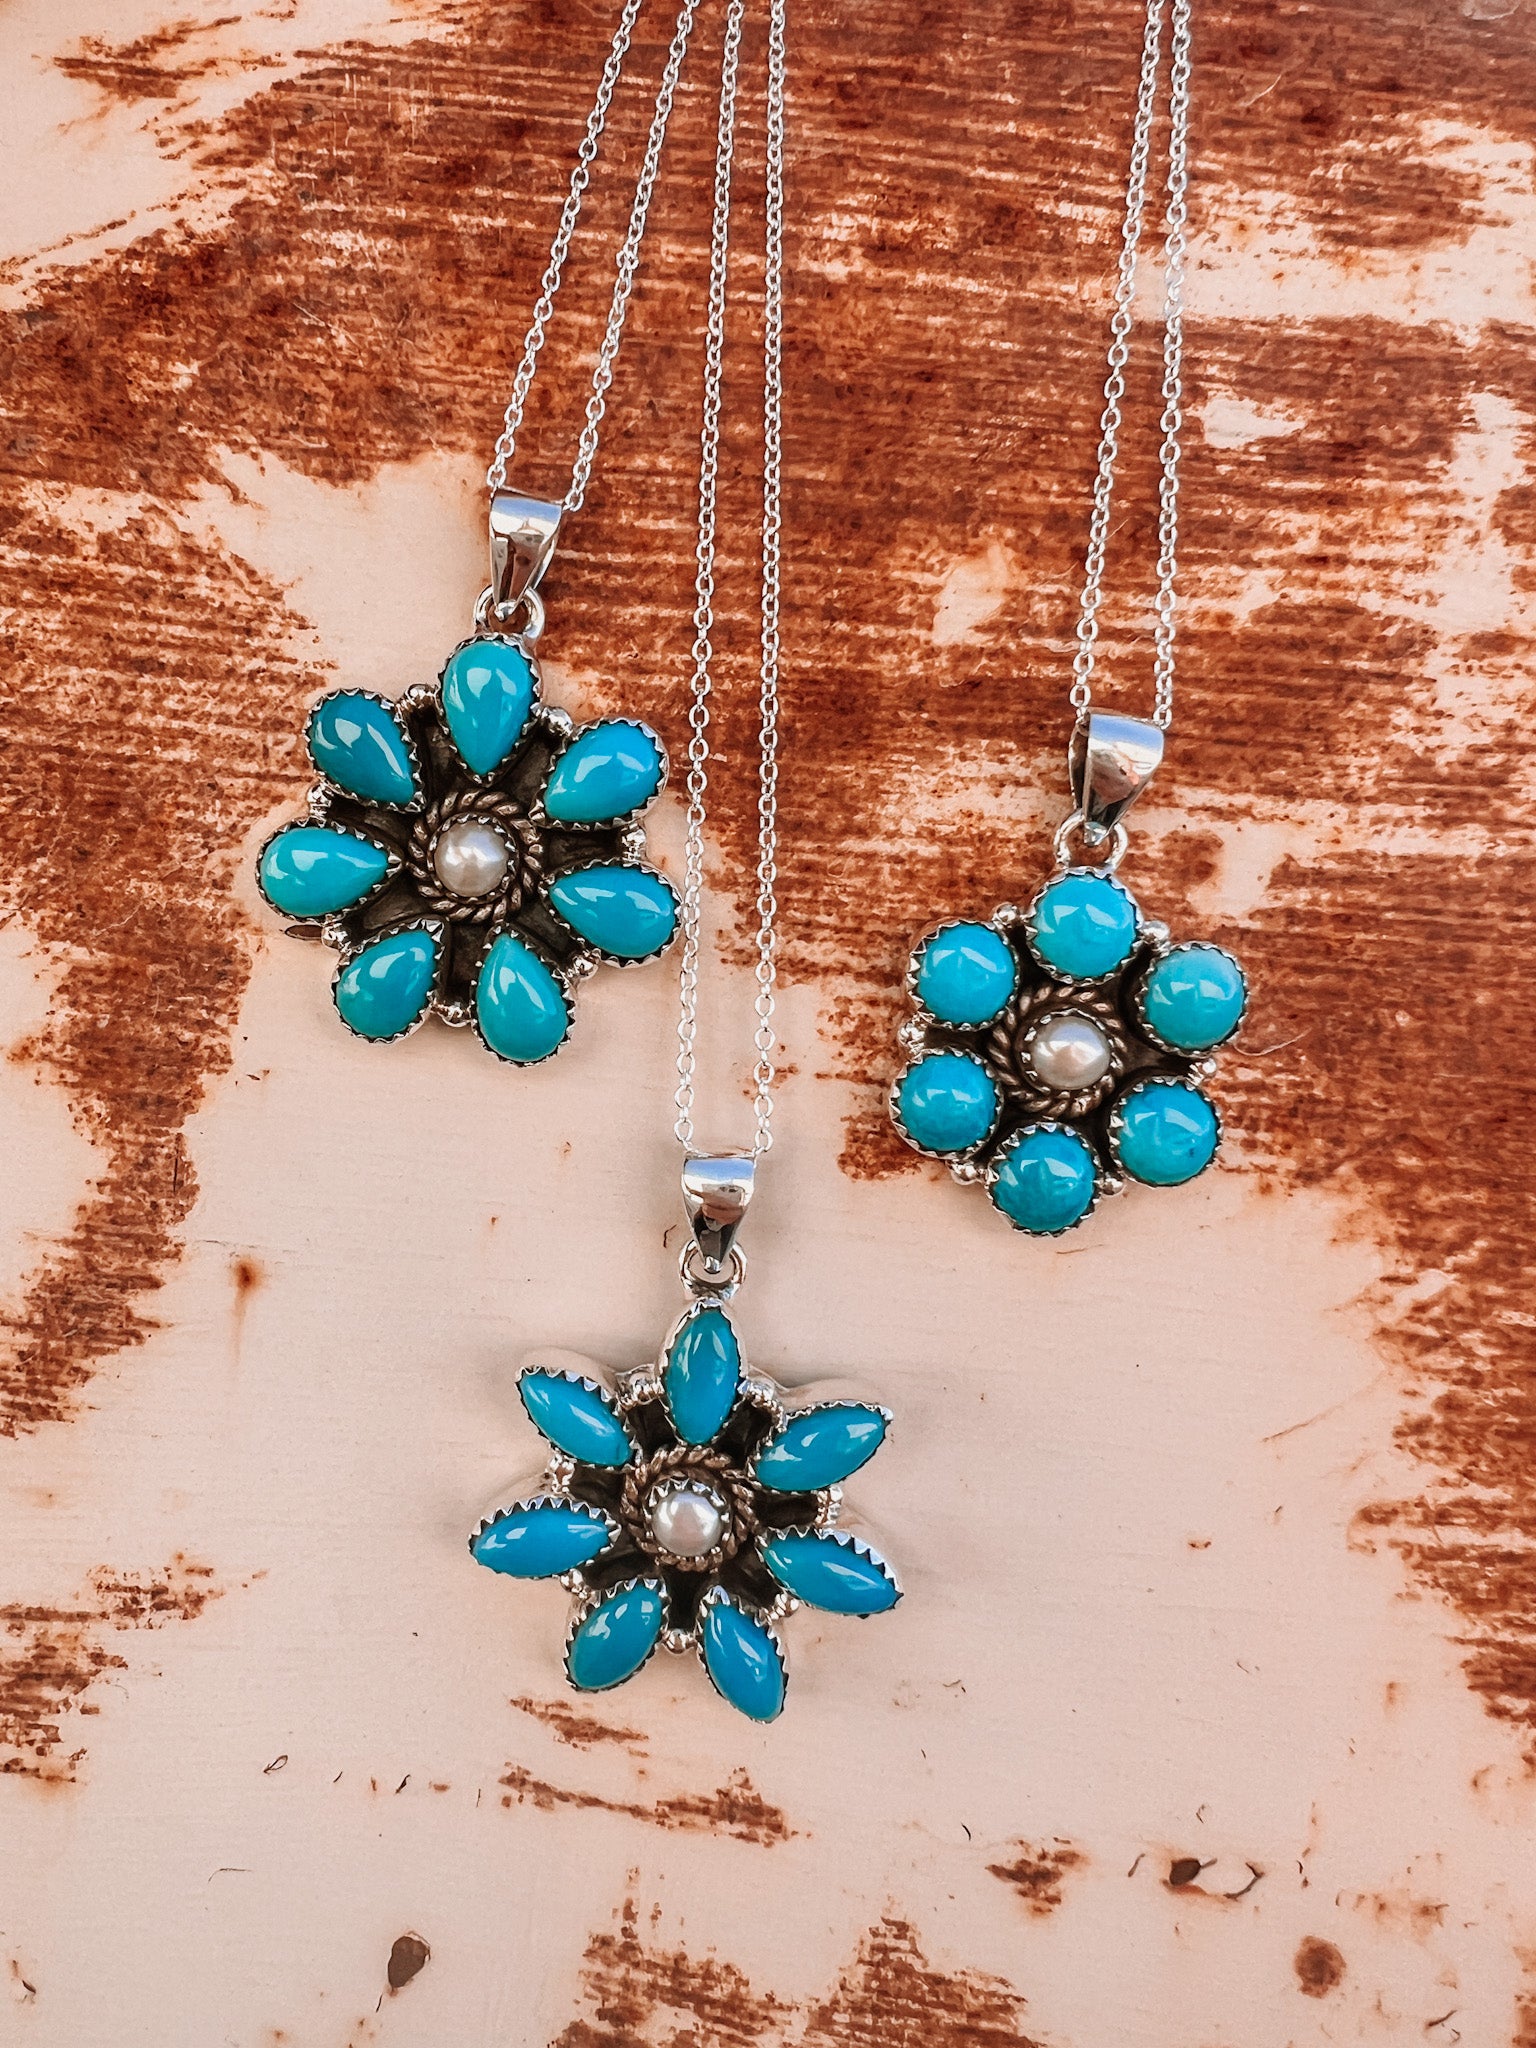 San Antonio Flower Necklace from Isac Trading